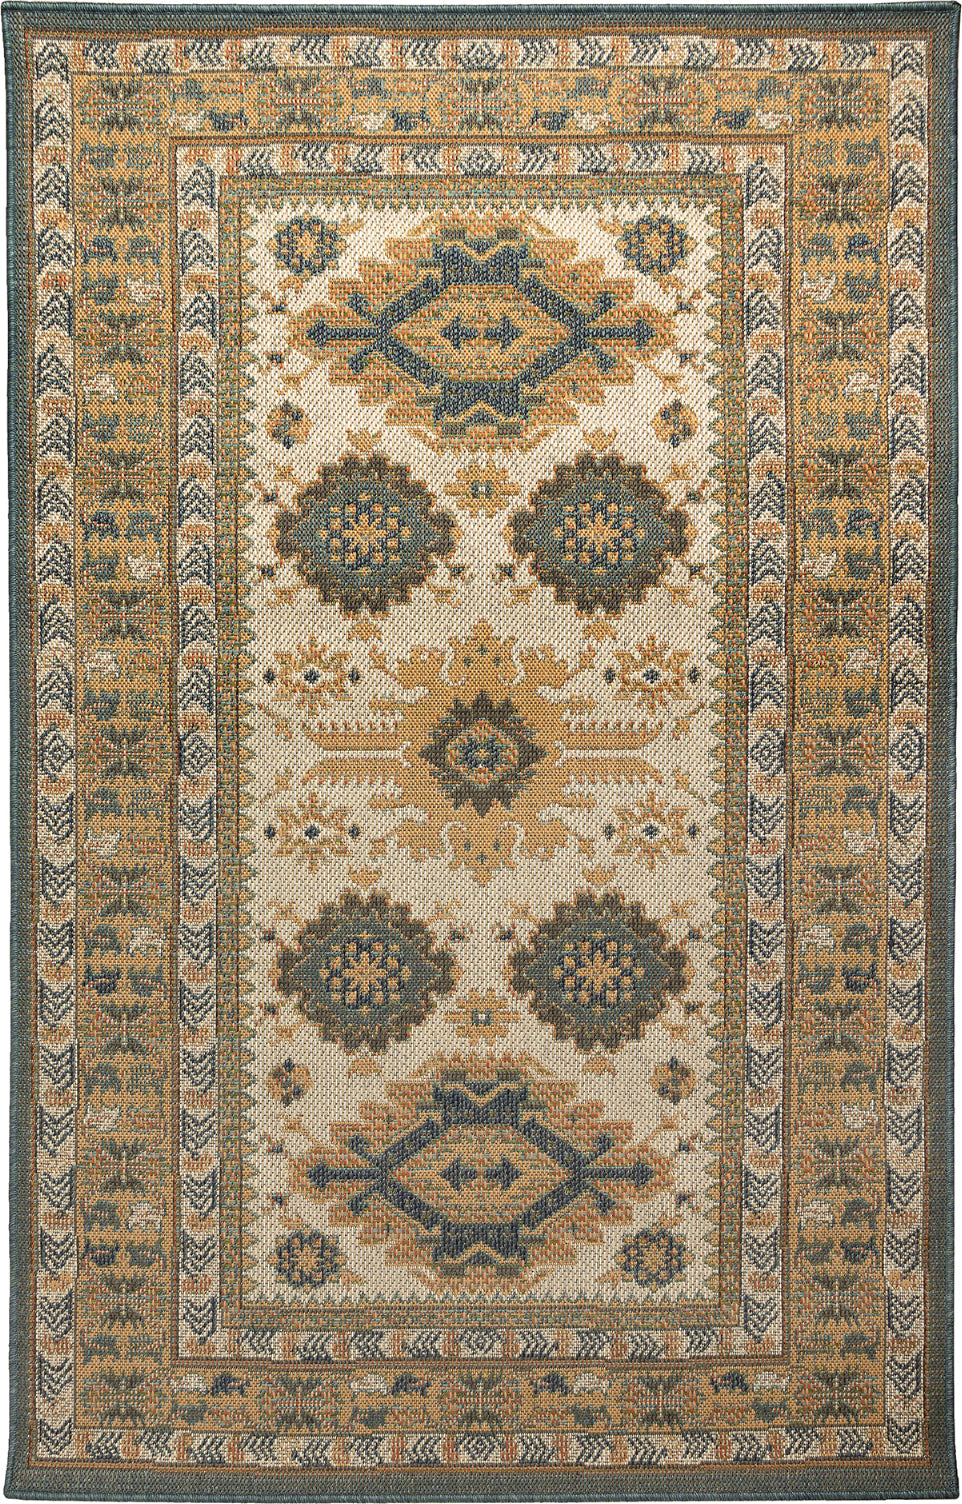 Trans Ocean Patio 6062/12 Serapi Ivory Area Rug by Liora Manne